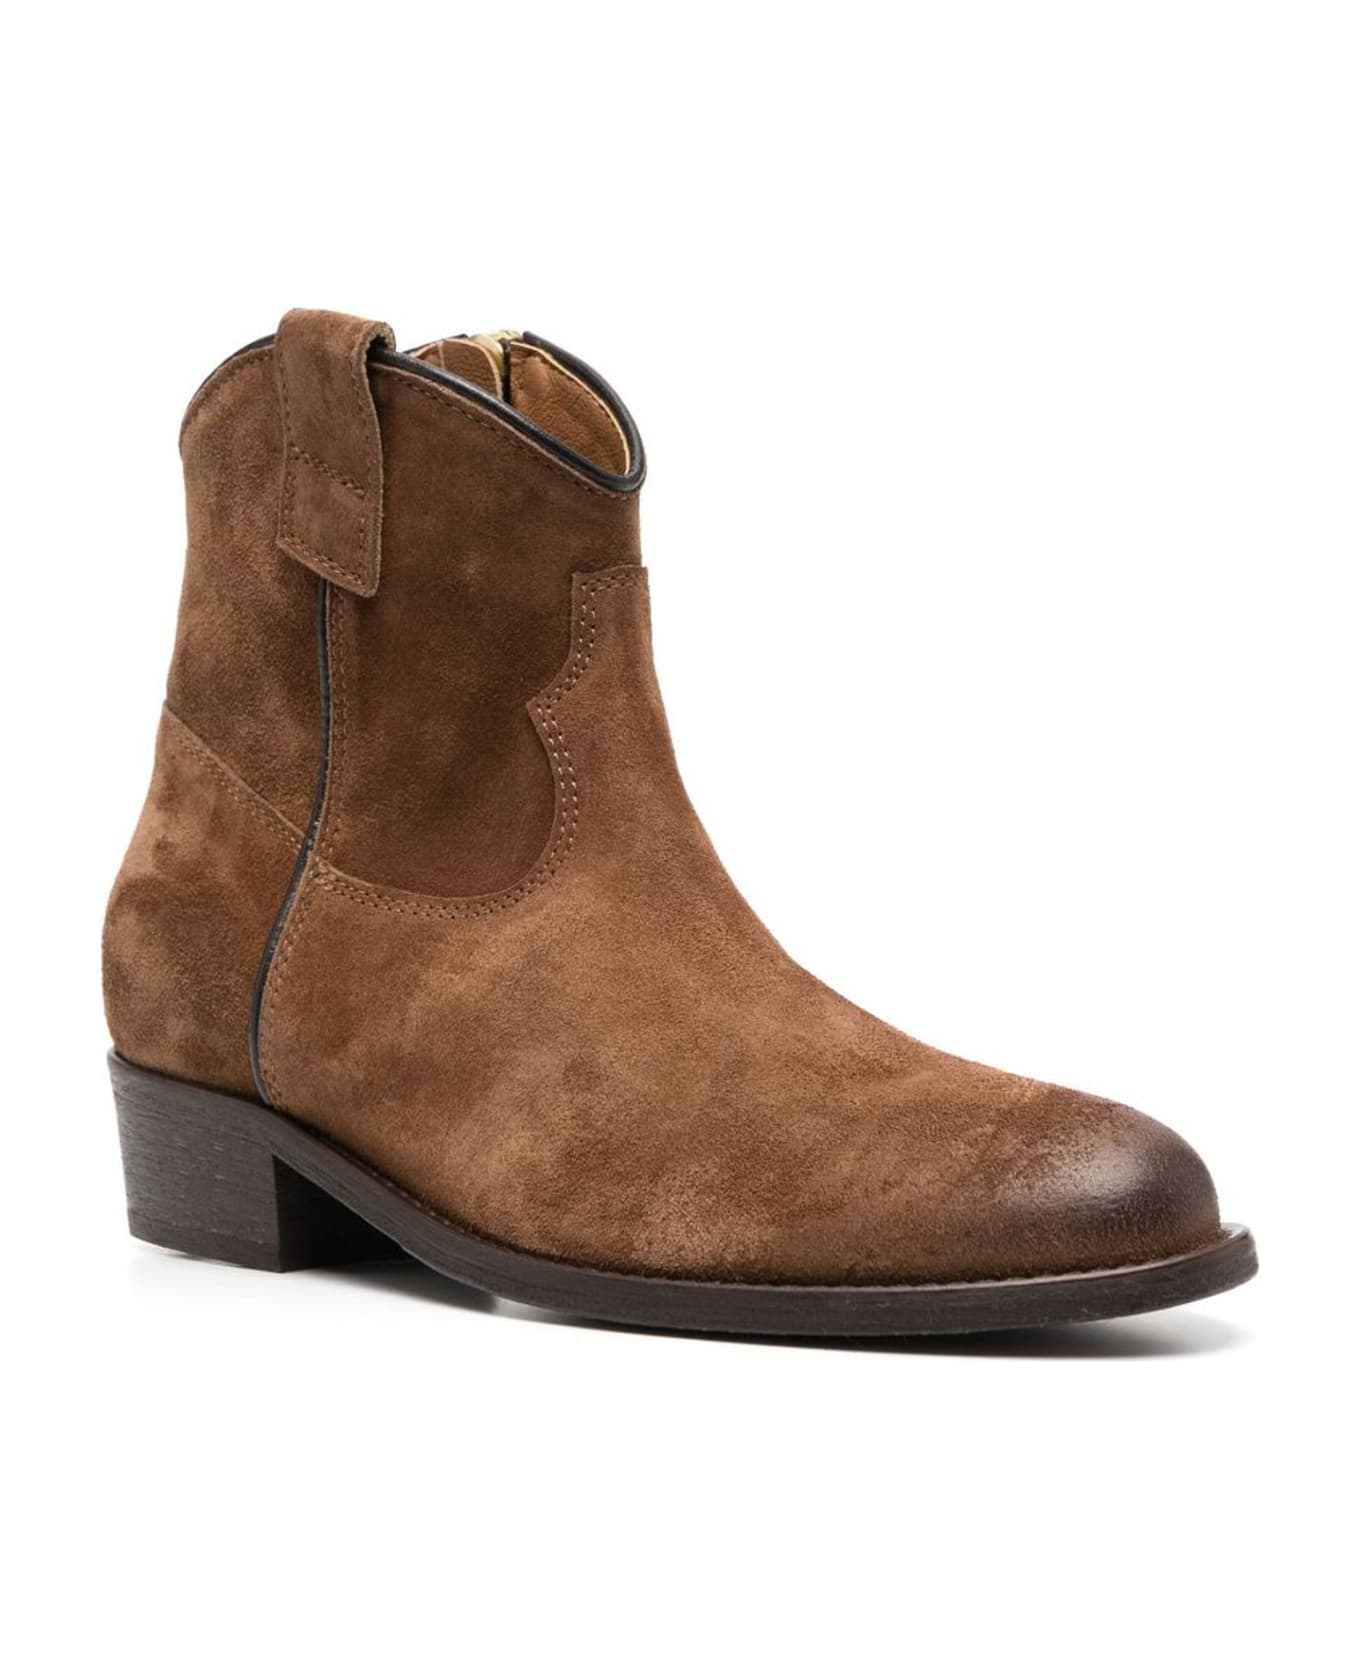 Via Roma 15 Brown Calf Suede Ankle Boots - Brown